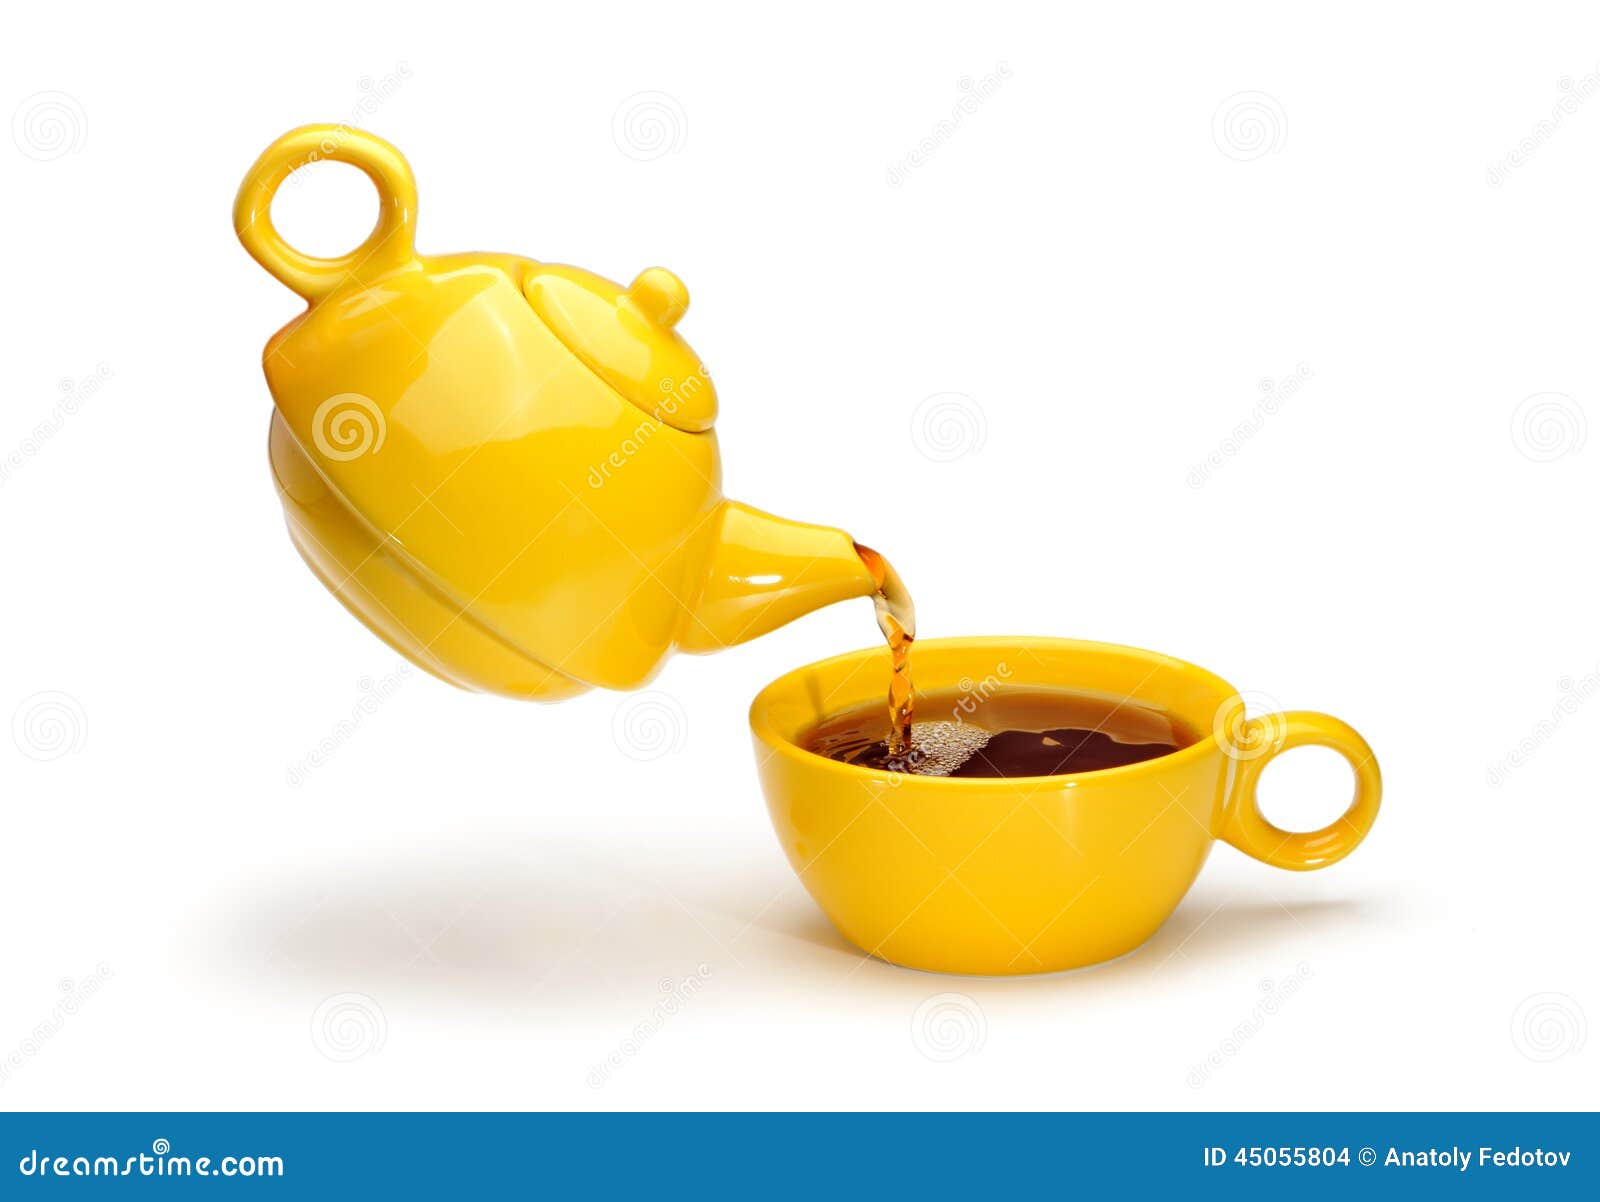 https://thumbs.dreamstime.com/z/yellow-teapot-pouring-tea-yellow-cup-isolated-white-background-45055804.jpg